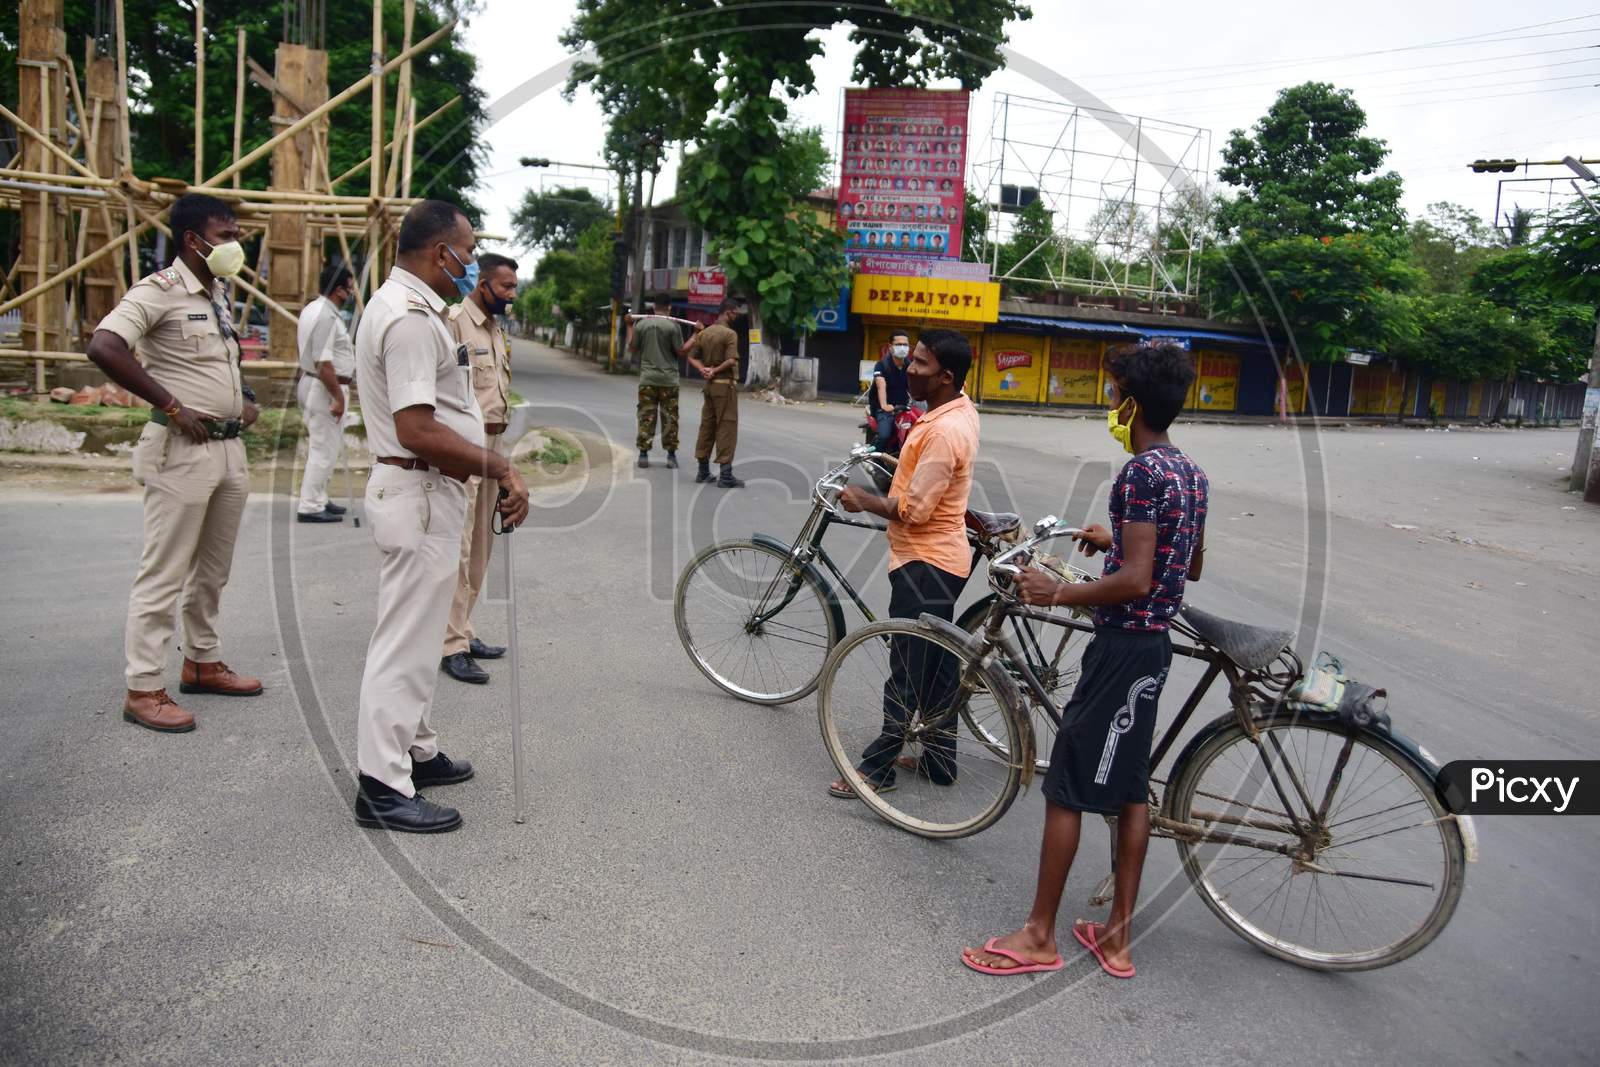 Police officers question commuters during the lockdown imposed by the Assam government to curb the spread of coronavirus in Nagaon, Assam on July 04, 2020